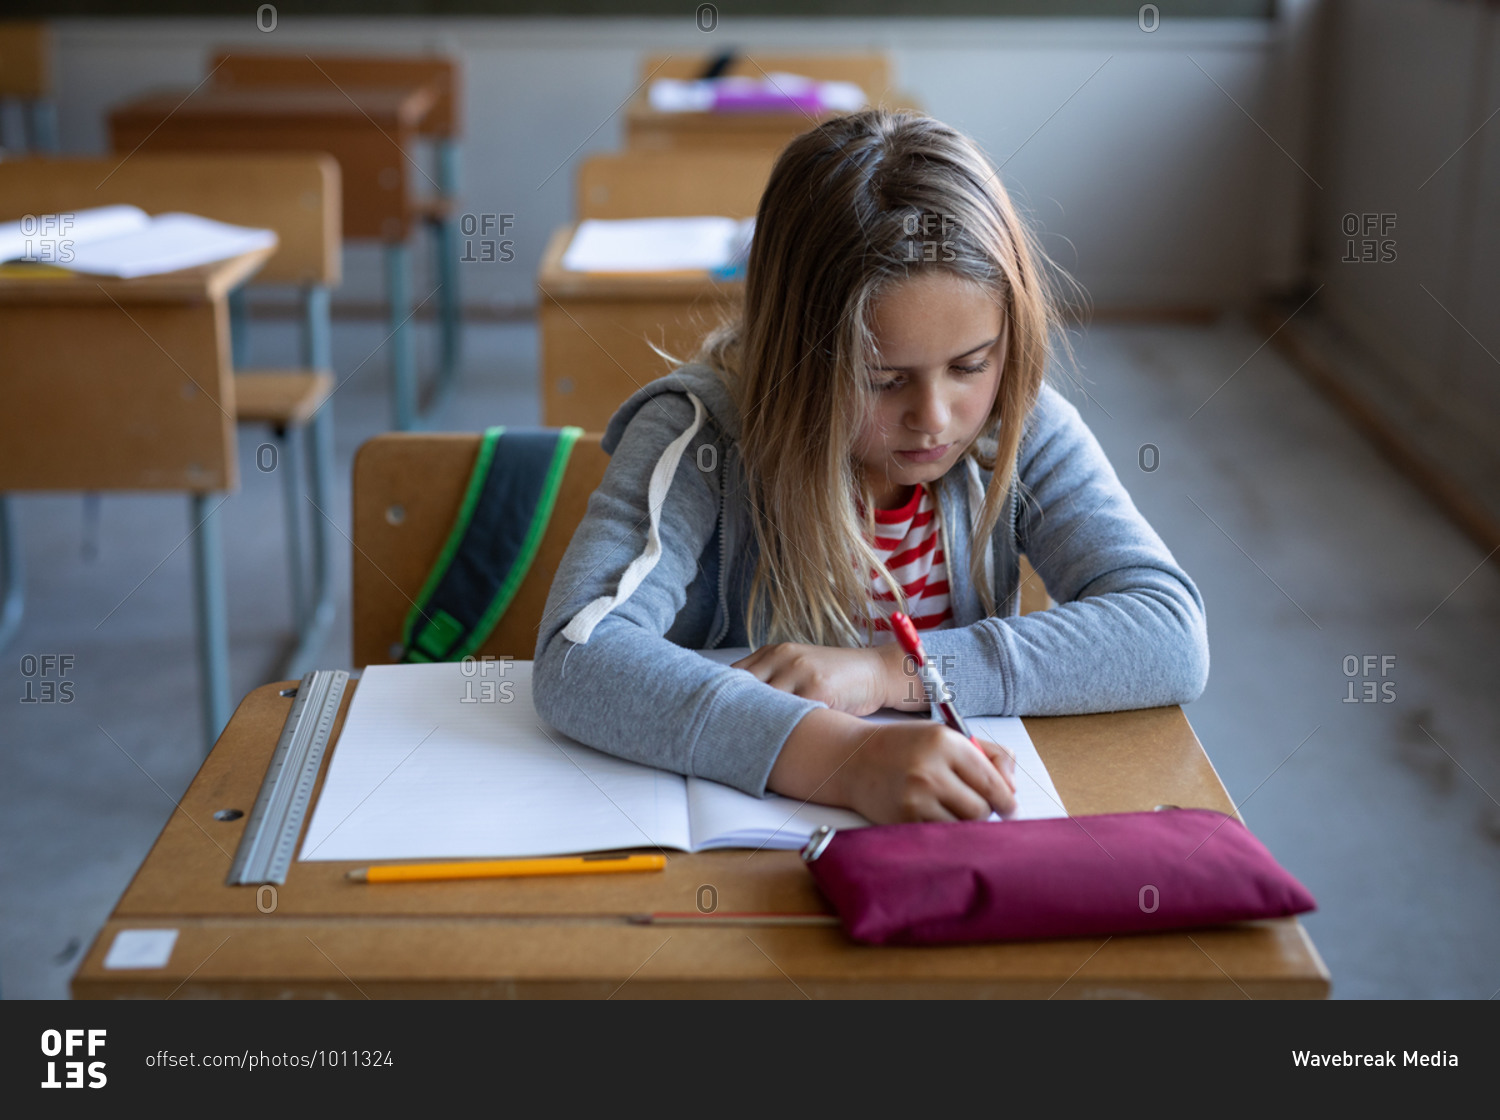 Caucasian girl writing in a book while sitting on her desk at school. Primary education social distancing health safety during Covid19 Coronavirus pandemic.